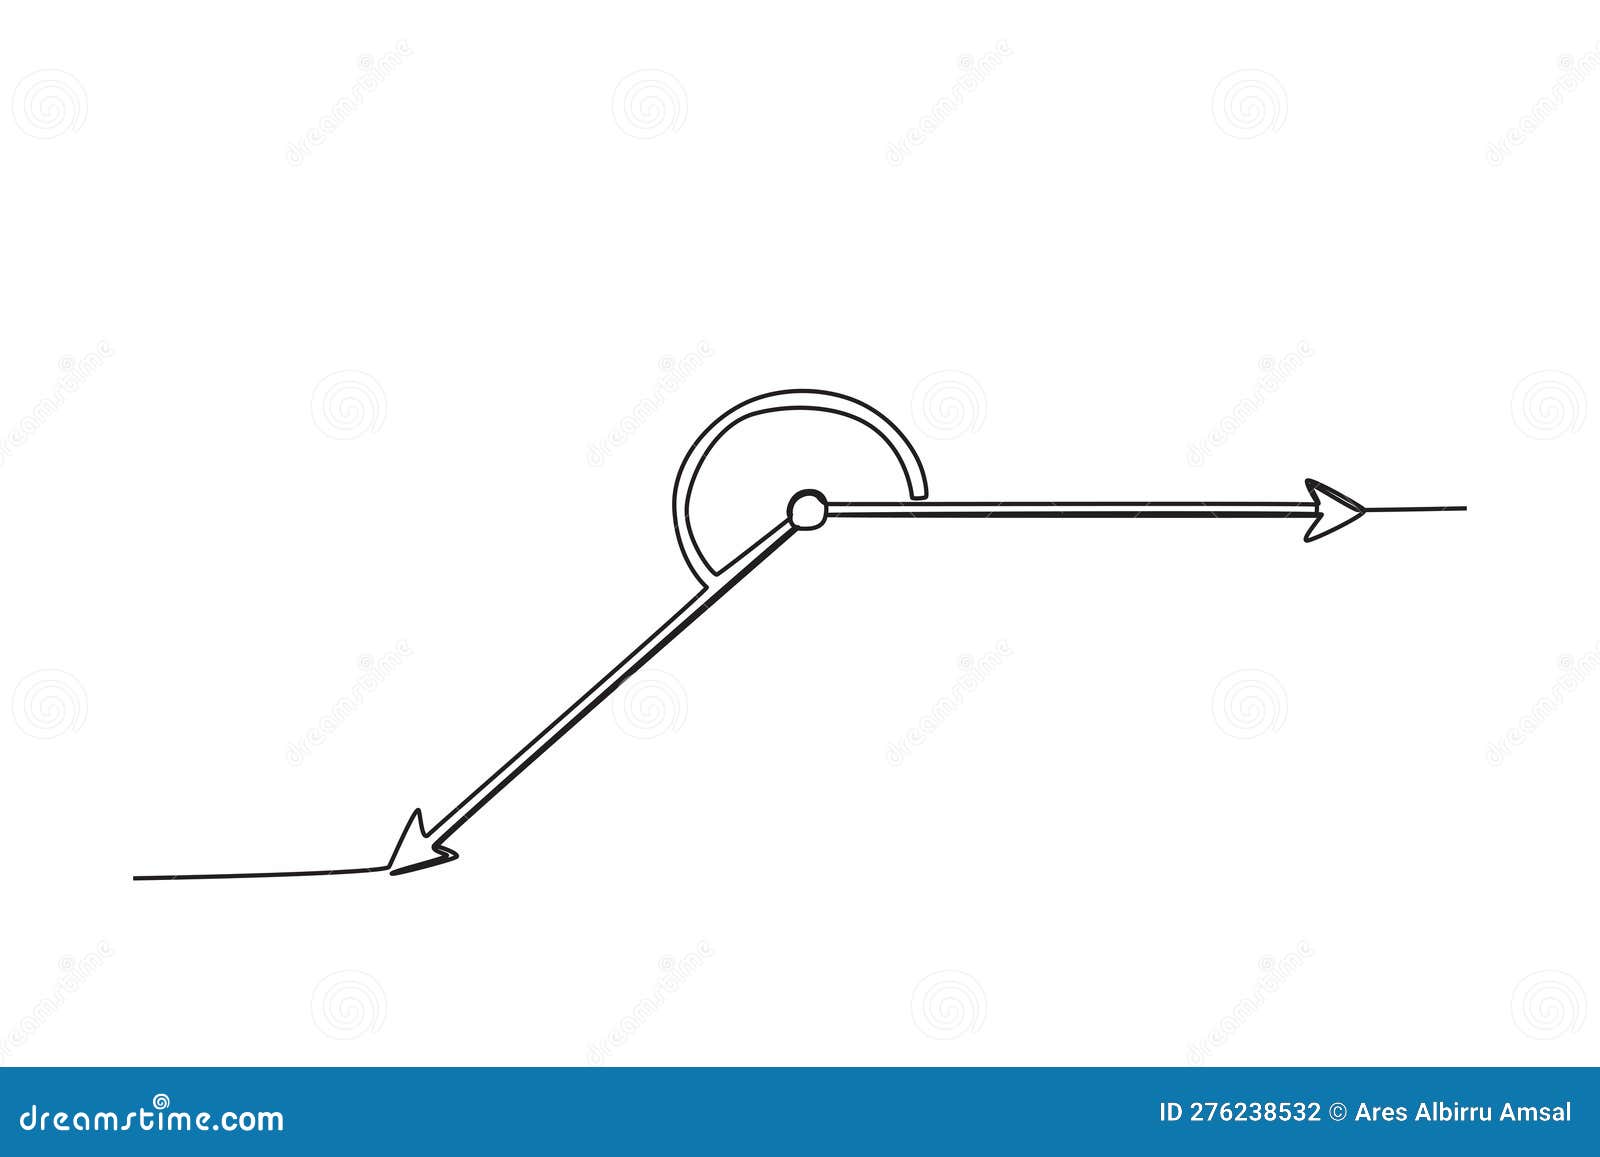 https://thumbs.dreamstime.com/z/obtuse-angle-degree-angles-one-line-drawing-276238532.jpg